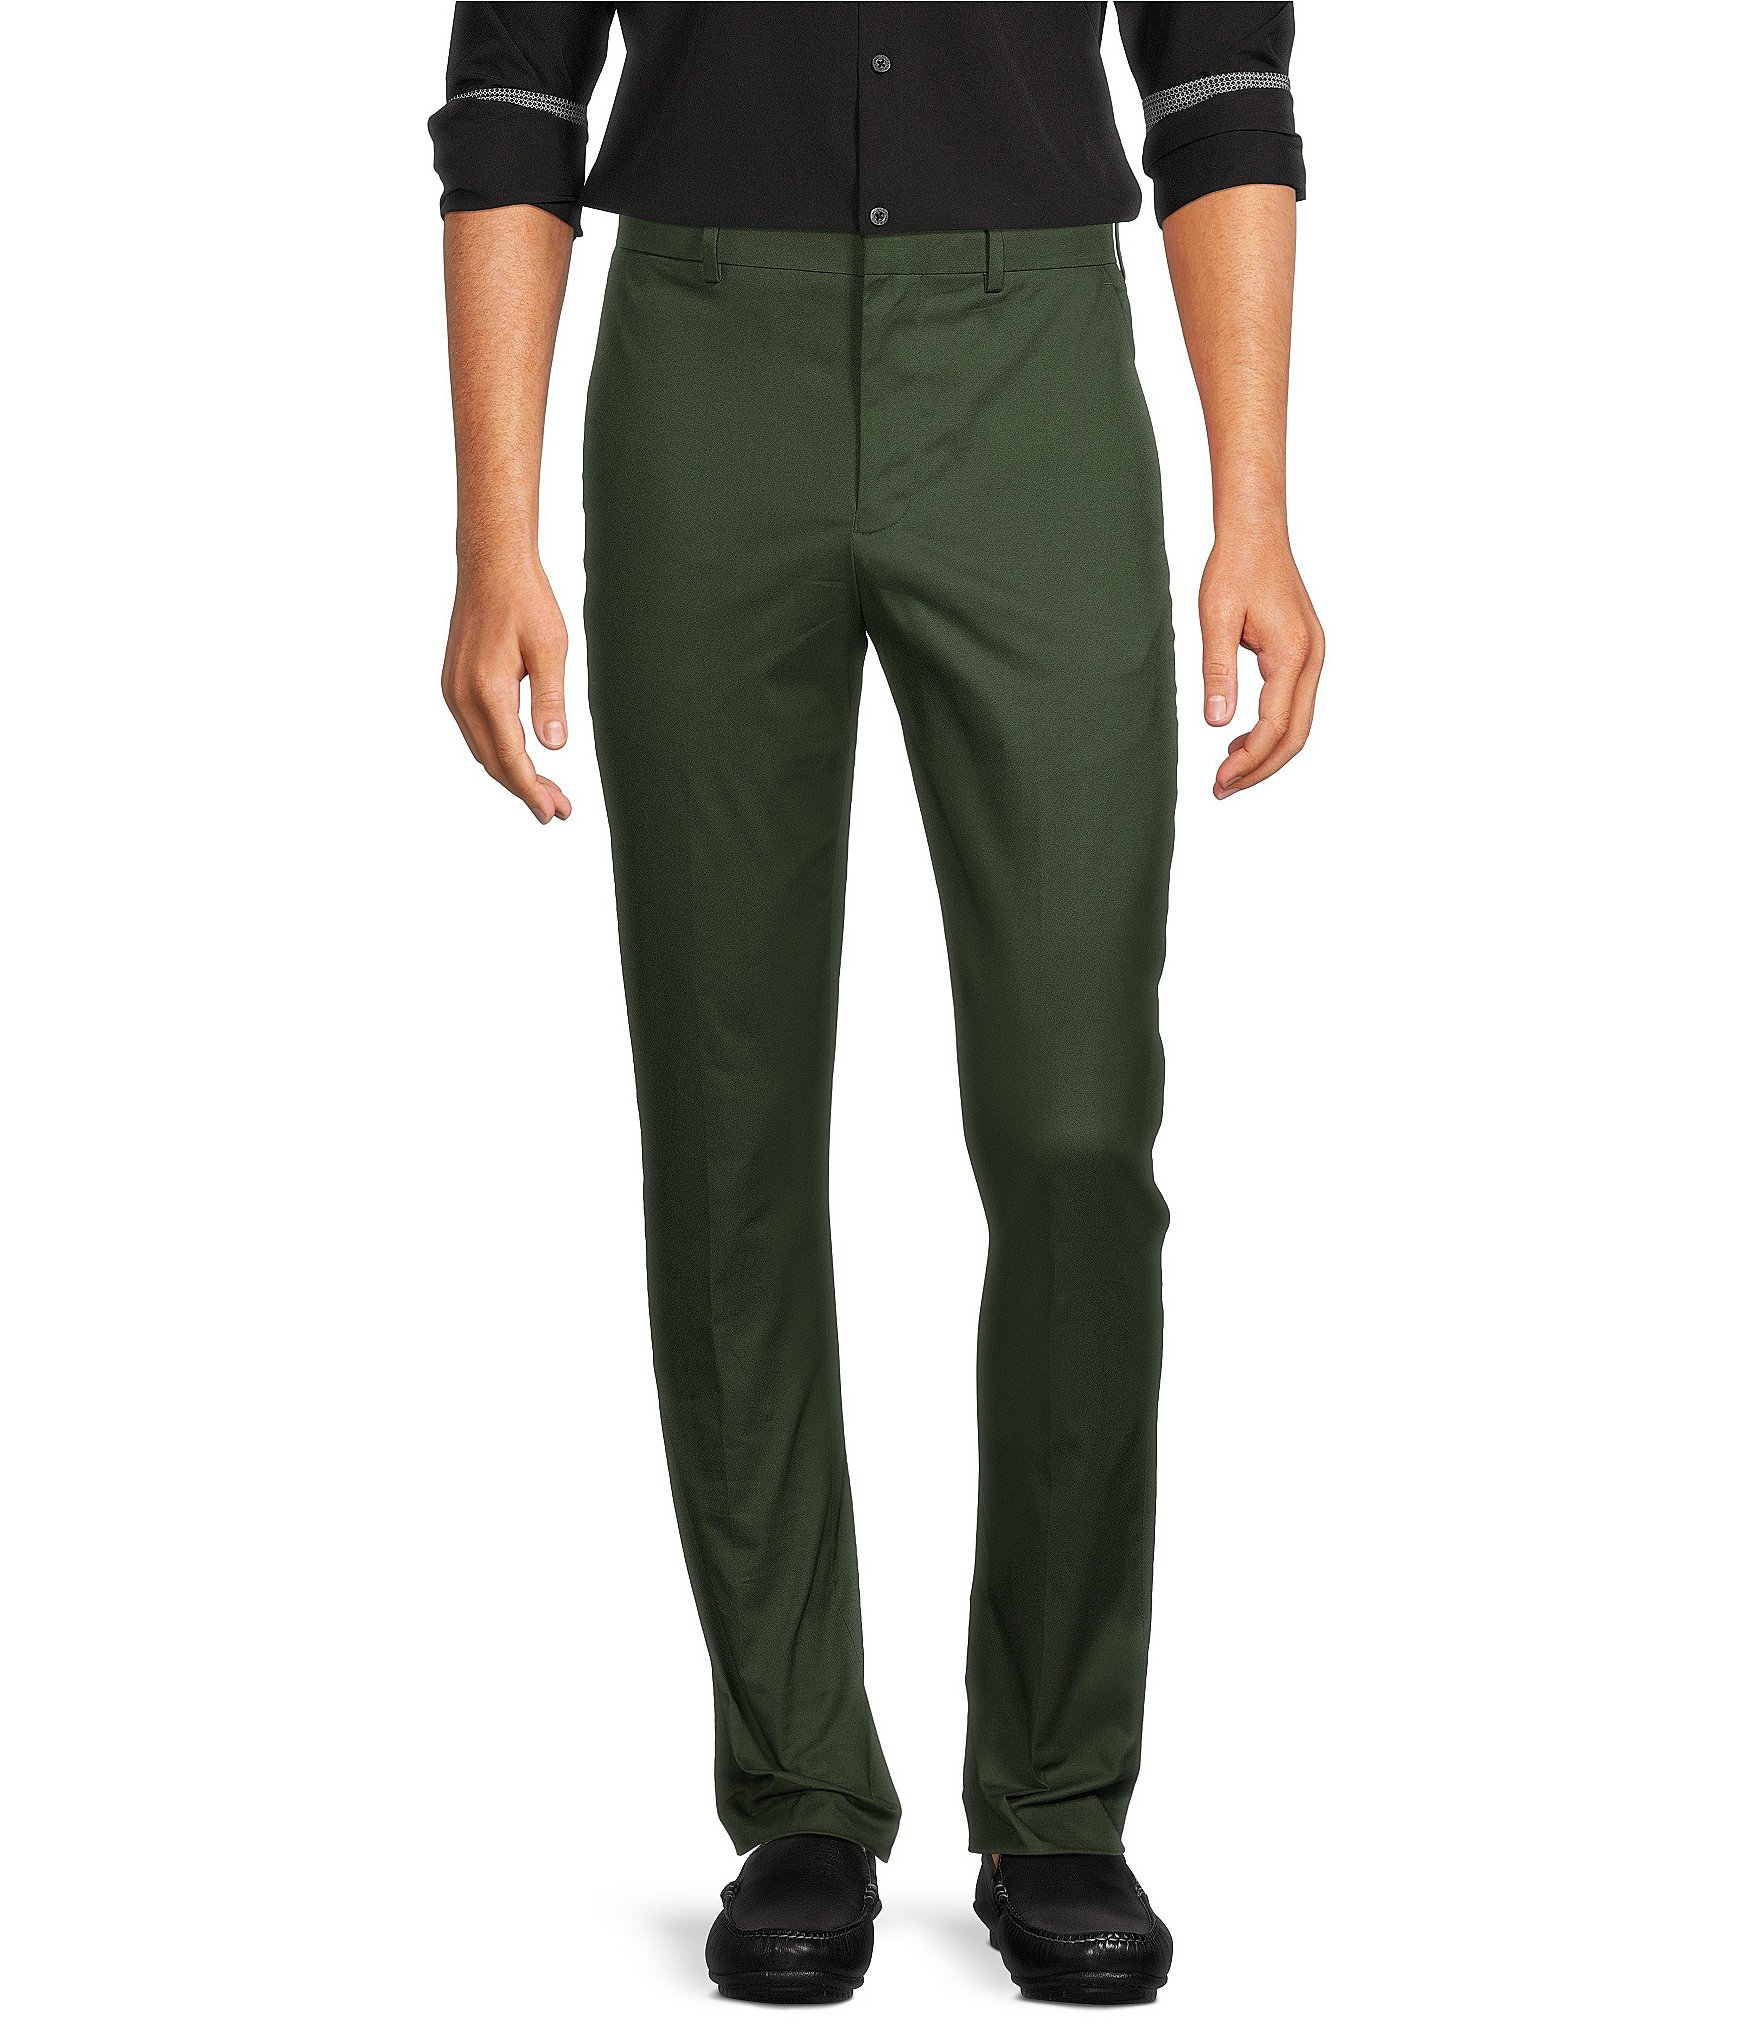 Polo Ralph Lauren Relaxed Fit Twill Hiking-Inspired Flat Front